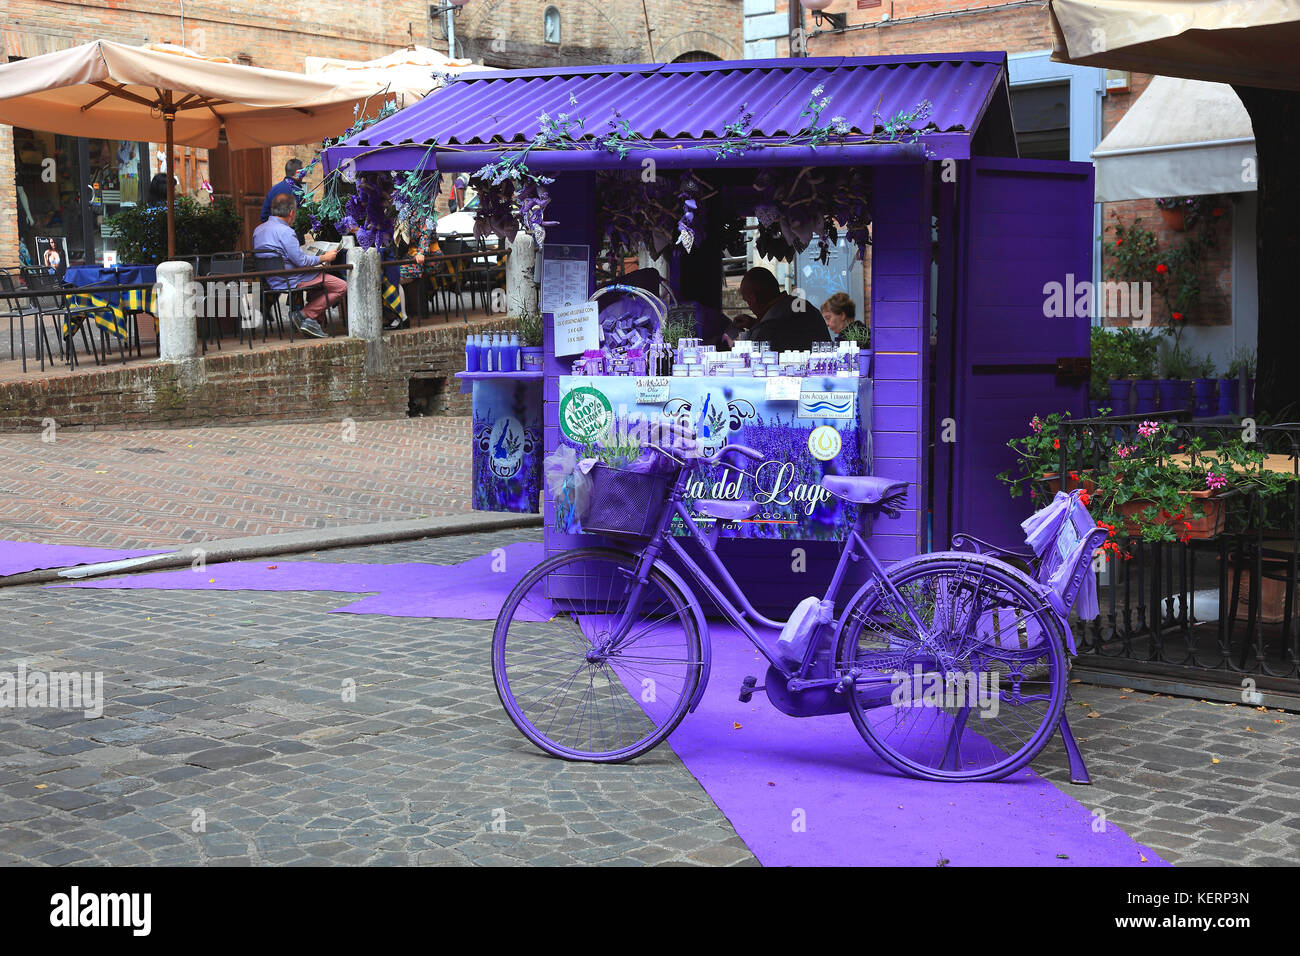 Market stall for the sale of products made from lavender, seen at Urbino, Marche, Italy Stock Photo